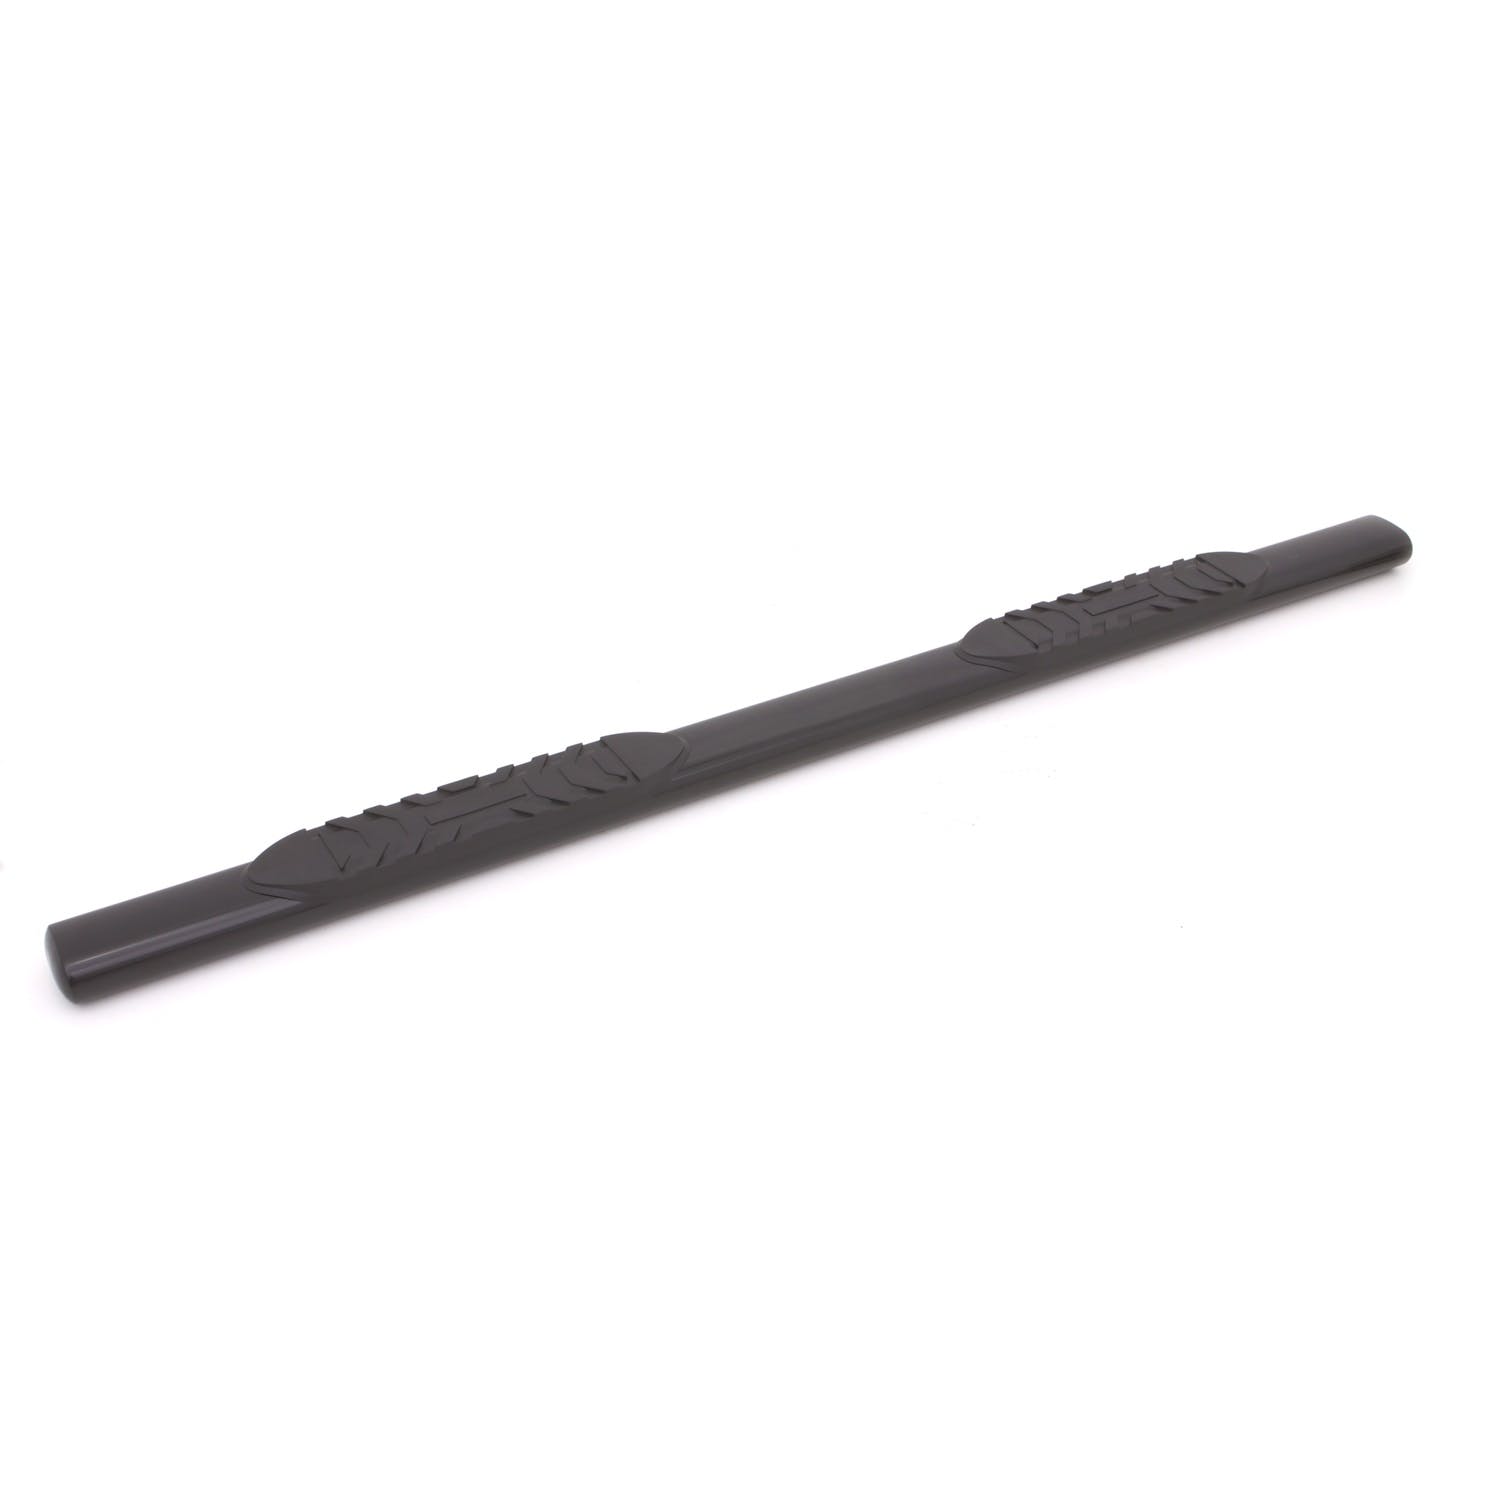 LUND 24086004 5 Inch Oval Straight Nerf Bar - Black 5 In OVAL STRAIGHT STEEL